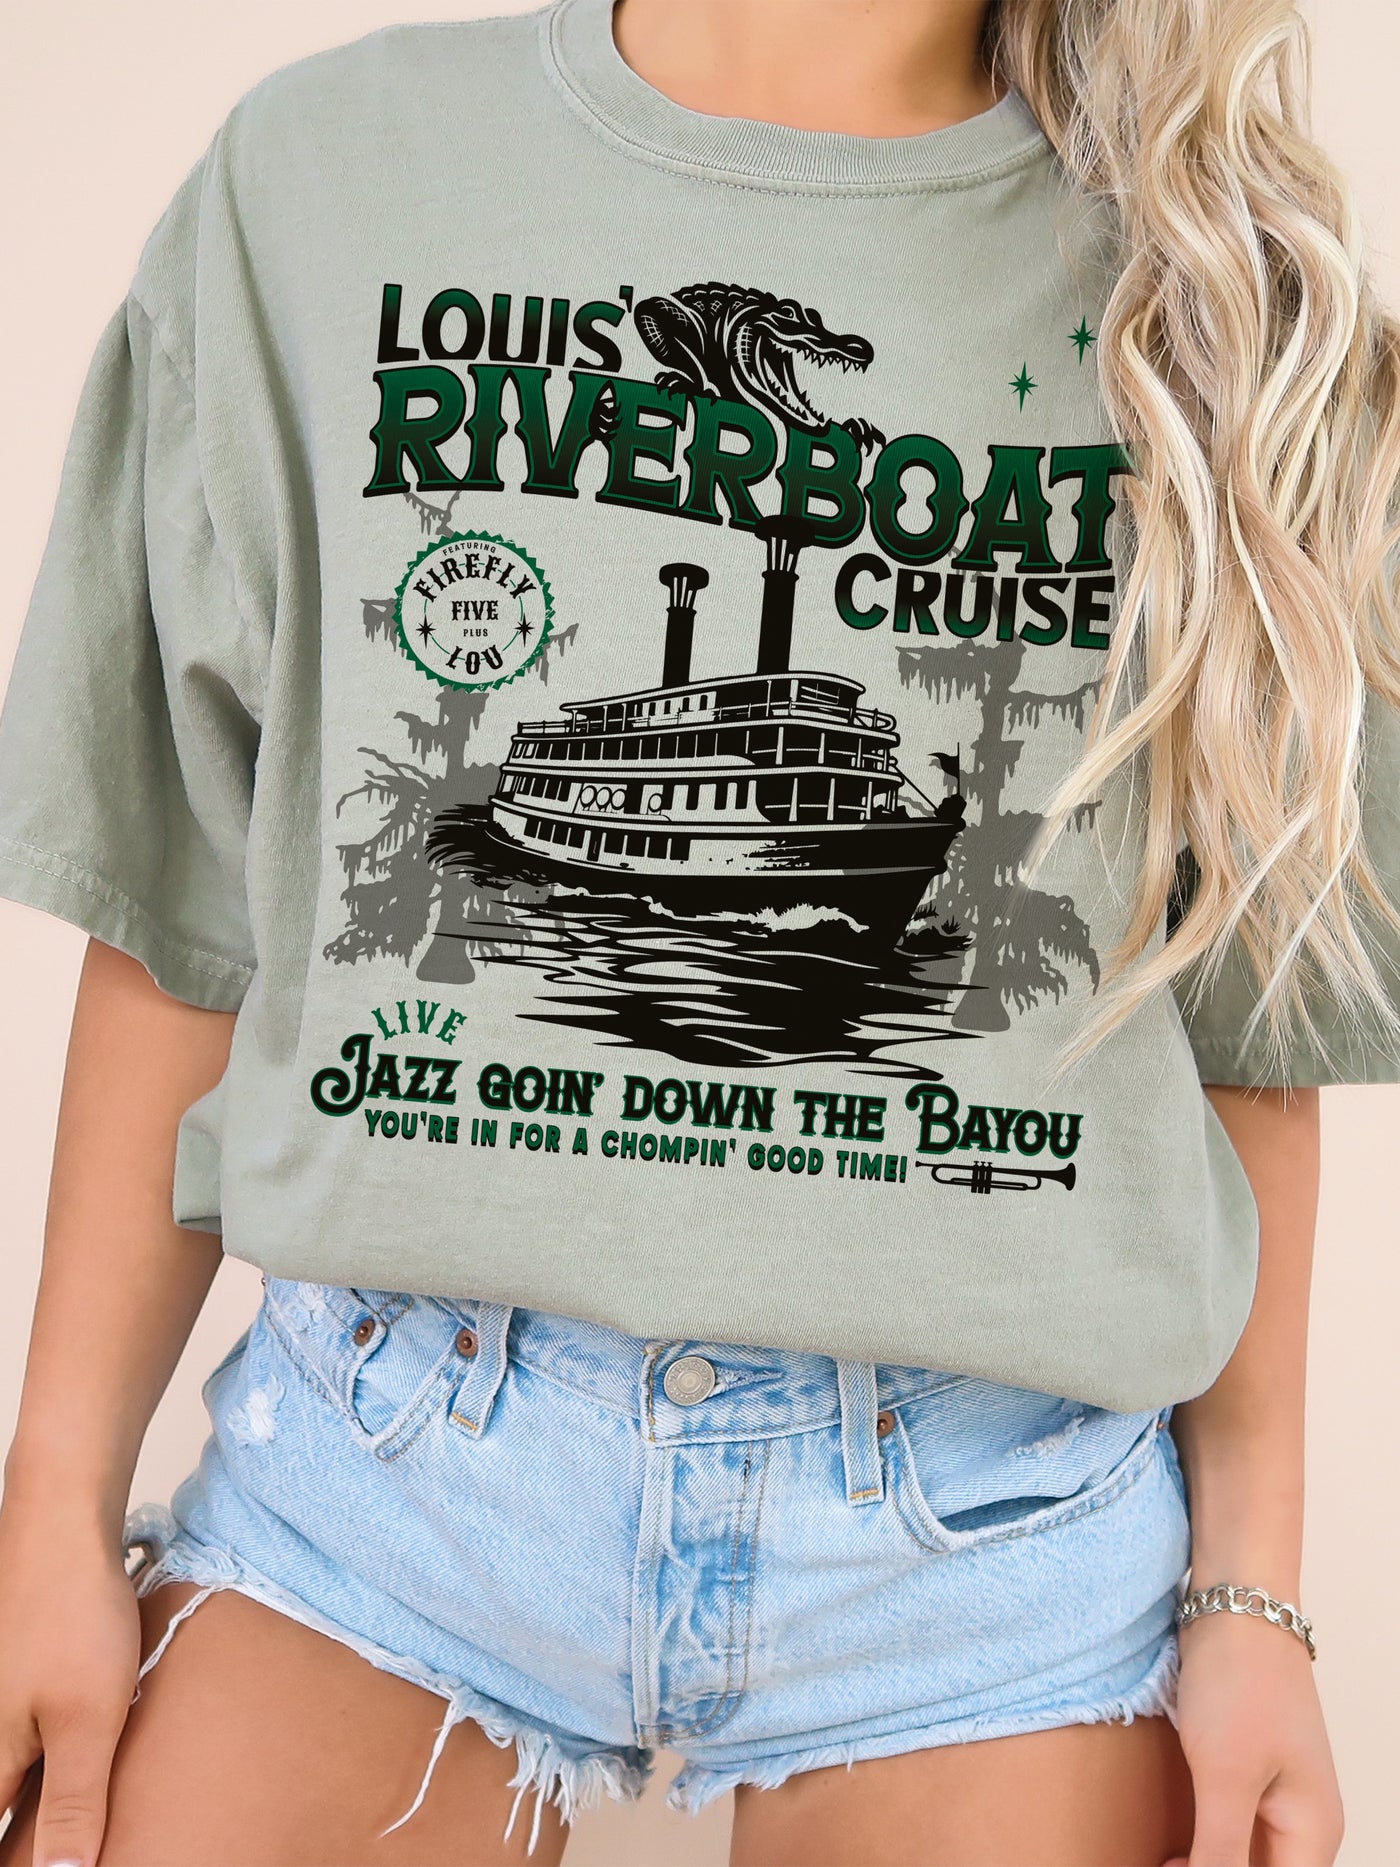 Louis Riverboat Cruise Shirt (Wounded Warrior Exclusive)